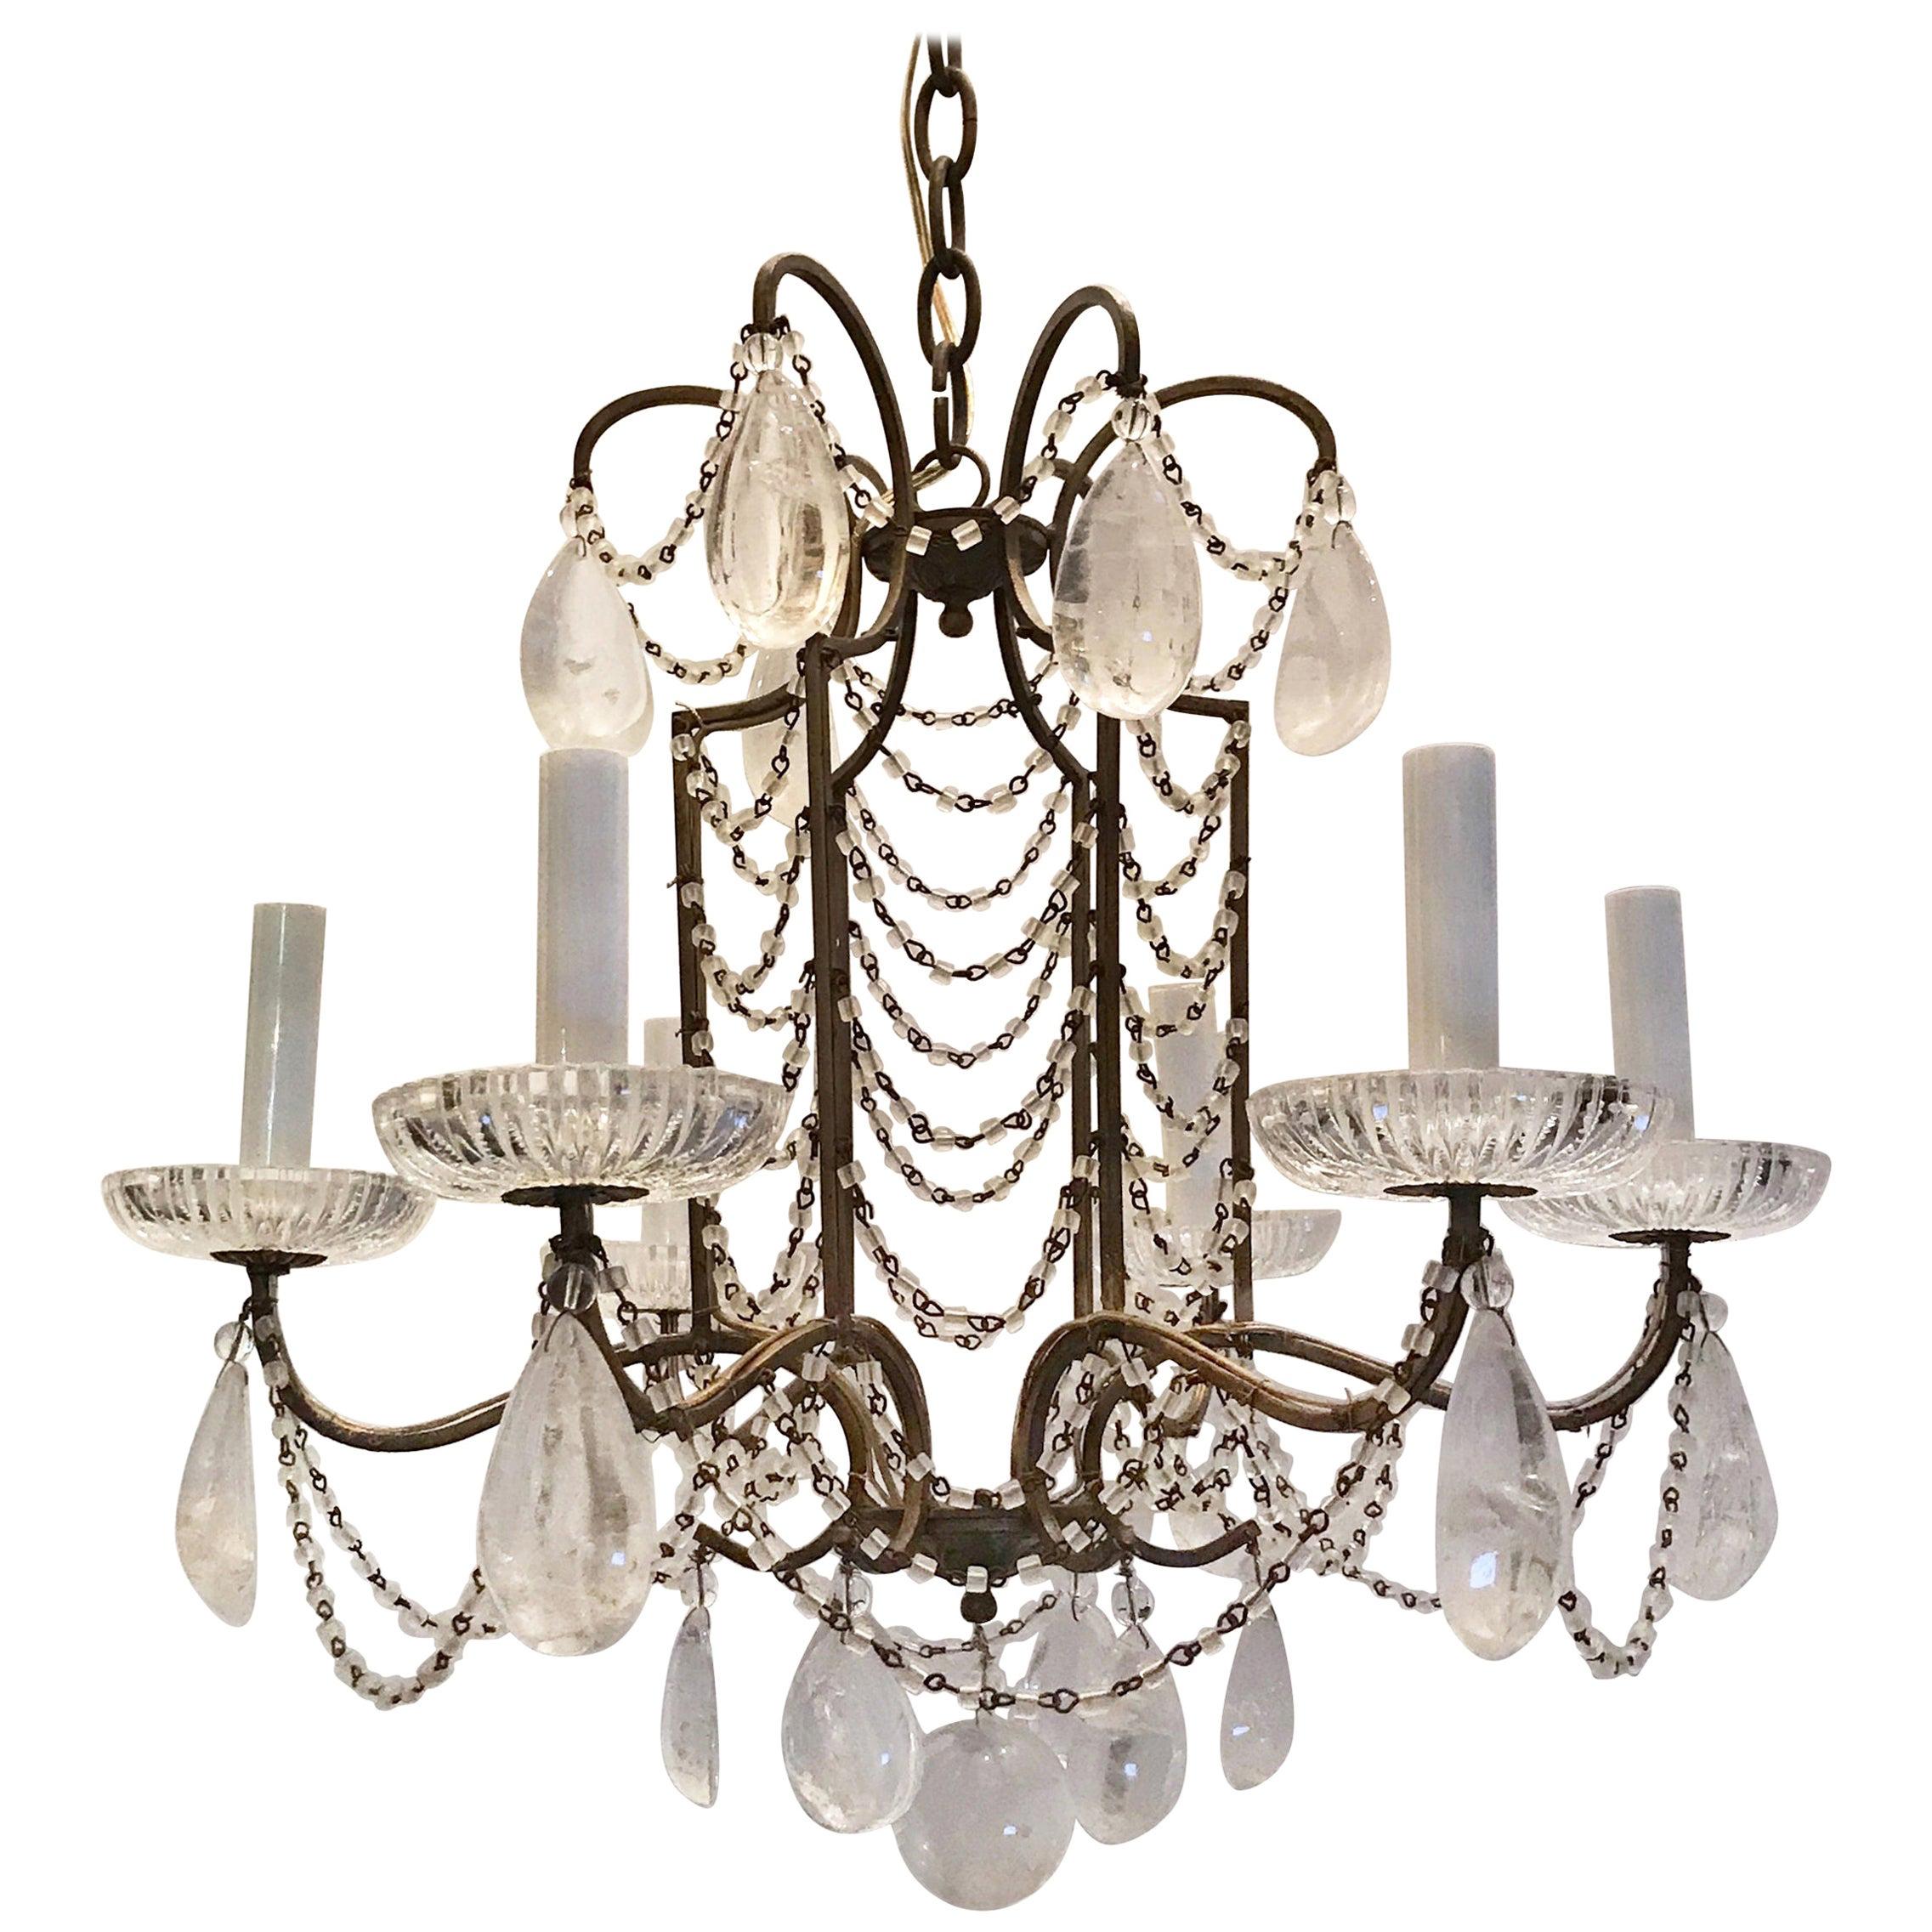 Wonderful French Beaded Swag Rock Crystal Maison Baguès Bird Cage Chandelier For Sale